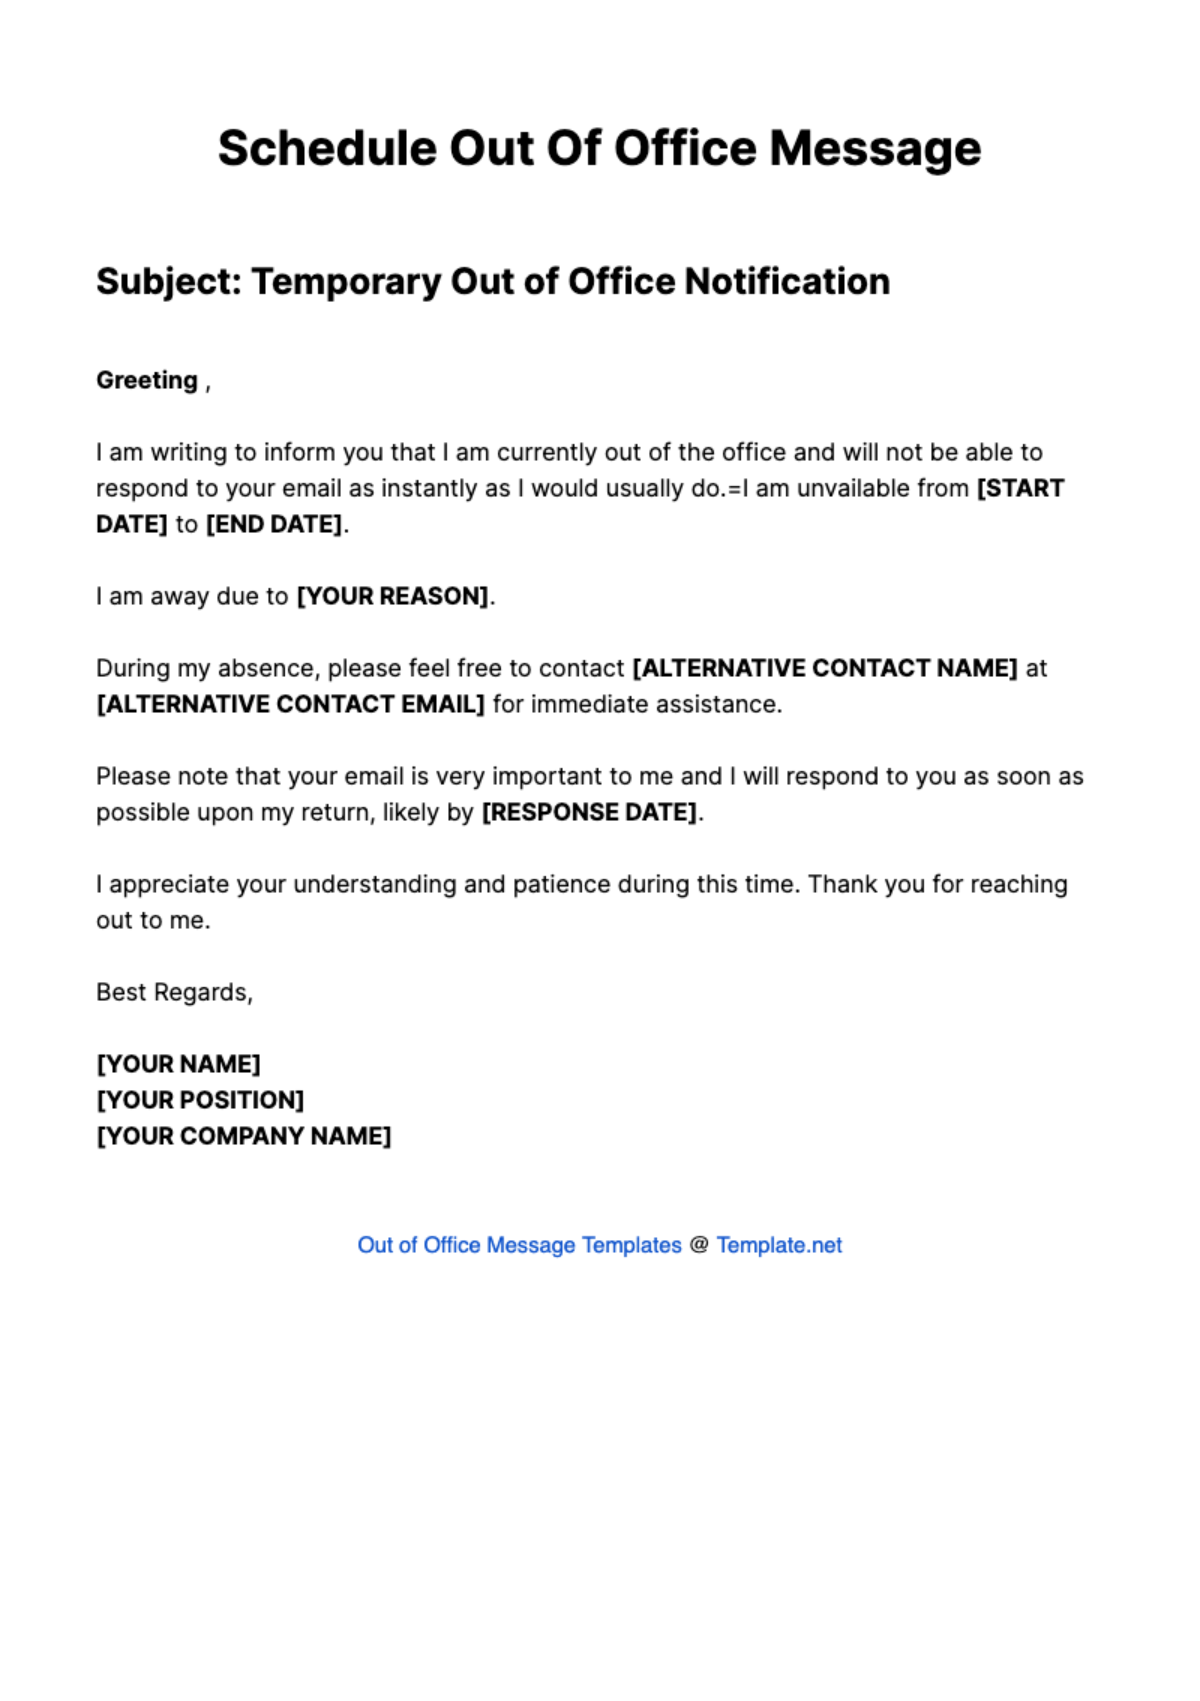 Free Schedule Out Of Office Message Template